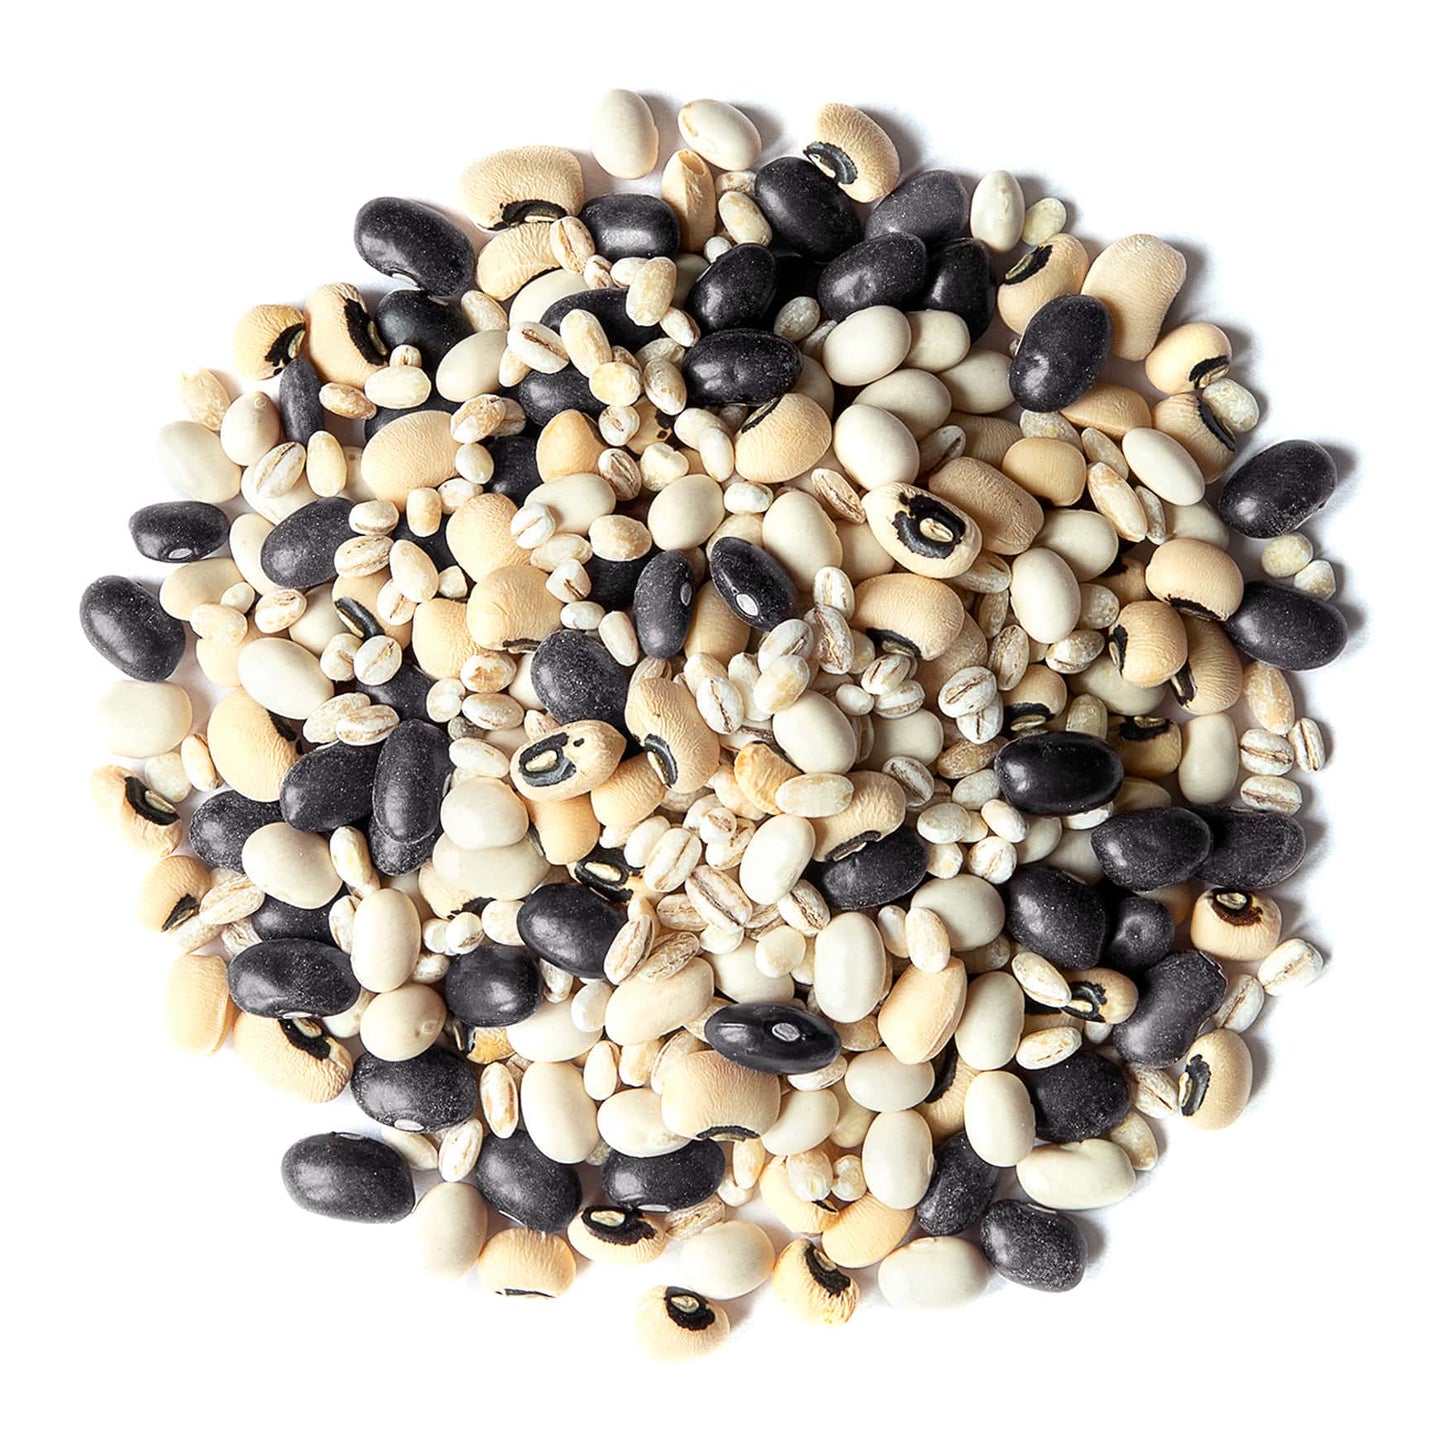 Organic Black Bean Soup Mix, X Pounds - Contains Non-GMO Black Beans, Black-eyed Peas, Pearled Barley, and Navy Beans, Vegan, Bulk, Good Source of Dietary Fiber, Protein, Copper, Folate